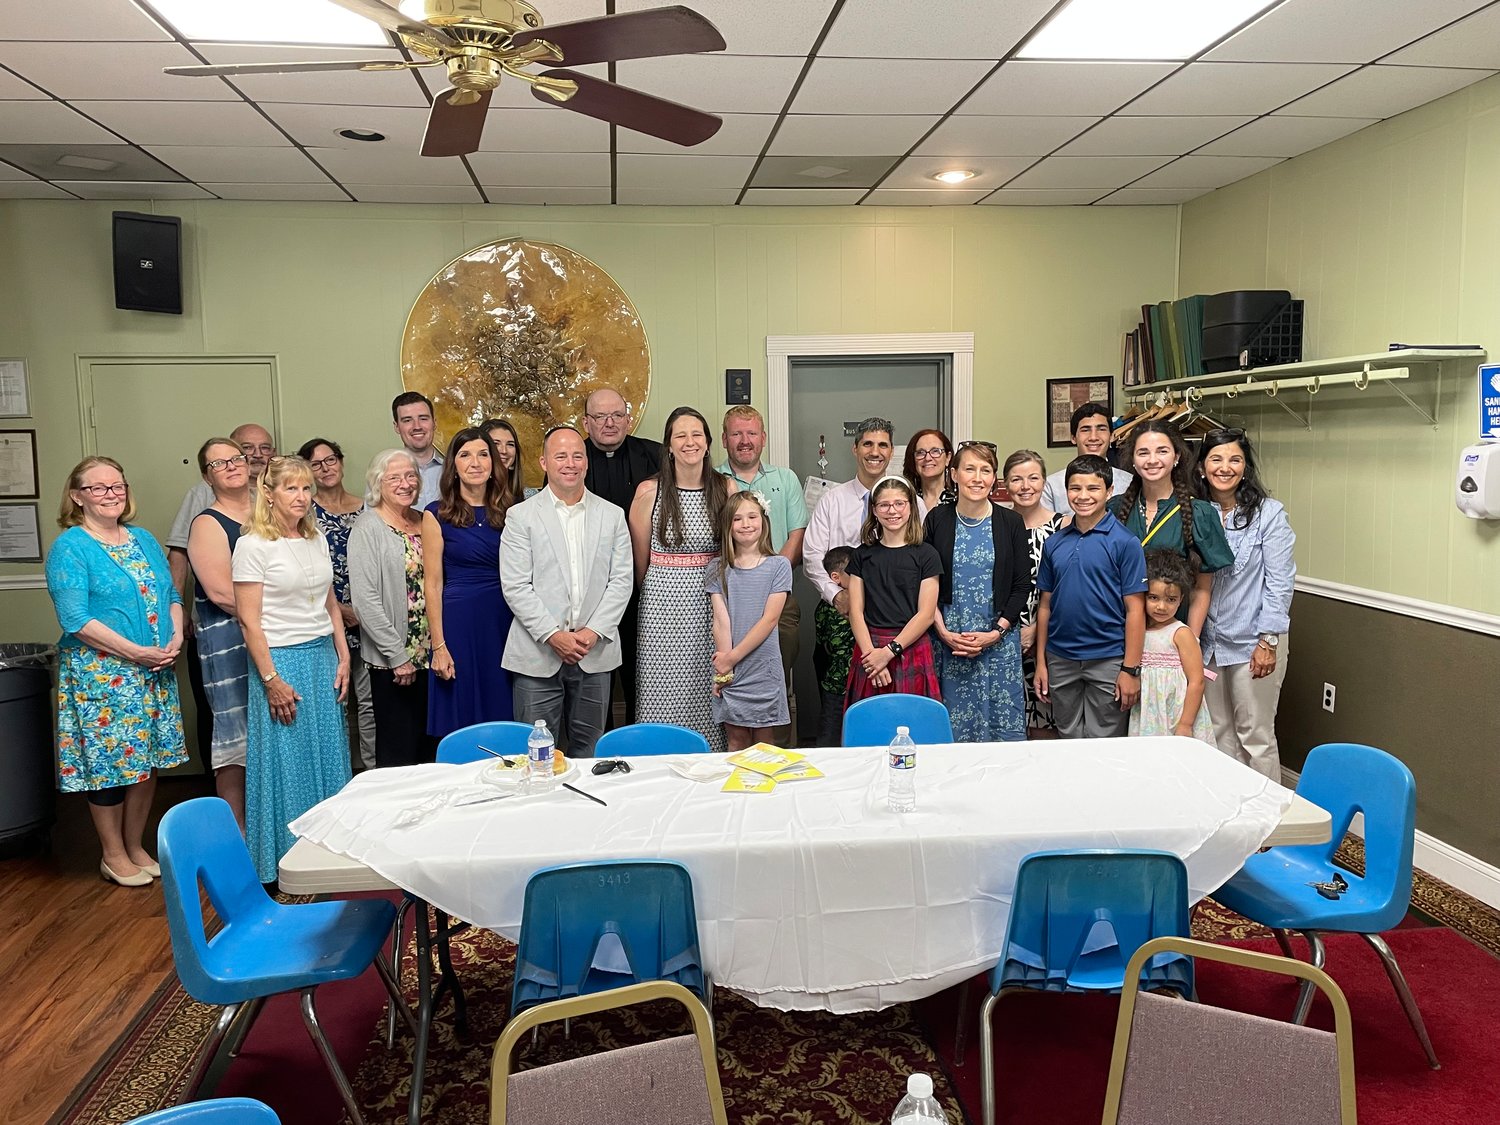 Teacher of the Year honorees Tim Feeney (middle, white jacket) and Susie Hughes (middle, black-and-white dress) were surrounded by family and friends at the KOC local heroes lunch on June 4 at the Columbian Center.